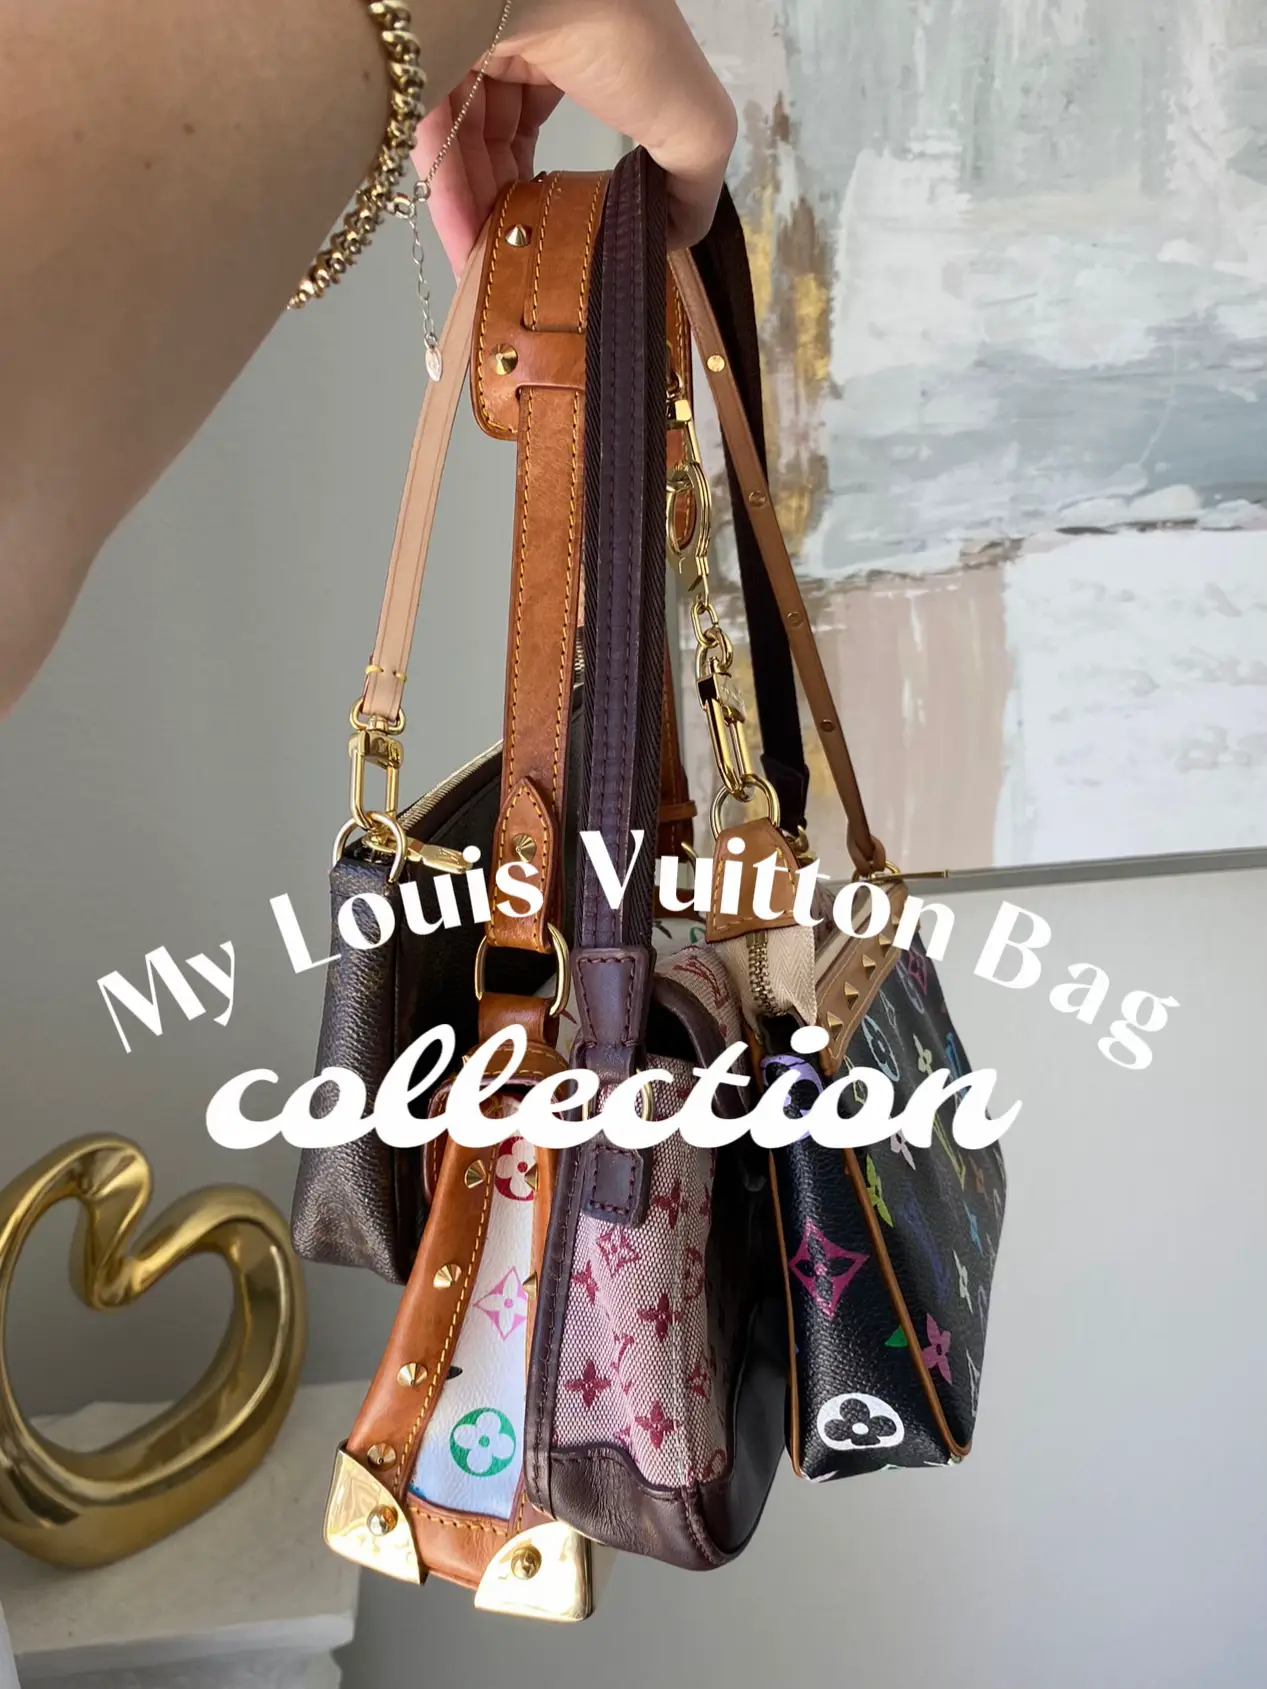 Loving my easy pouch on strap bag from Louis Vuitton #louisvuitton #lo, easy  pouch on strap louis vuitton